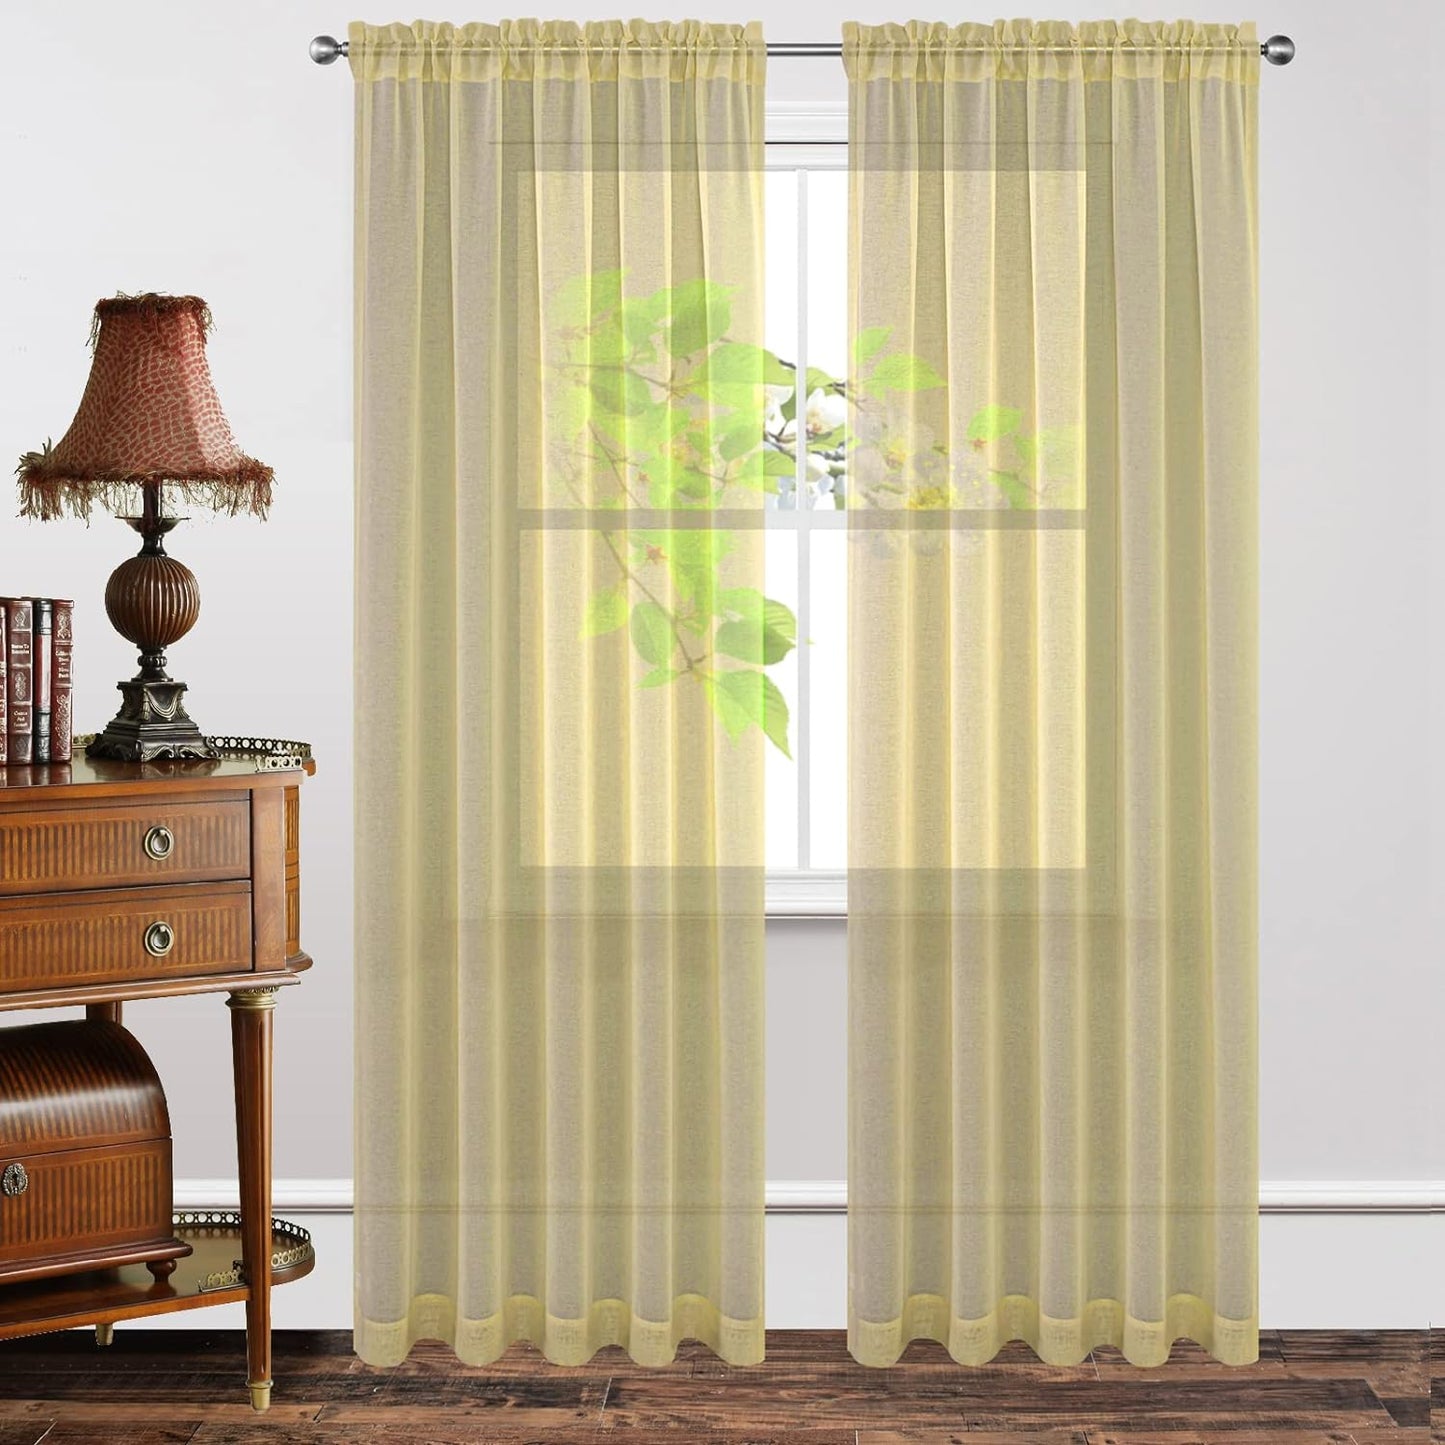 Joydeco White Sheer Curtains 63 Inch Length 2 Panels Set, Rod Pocket Long Sheer Curtains for Window Bedroom Living Room, Lightweight Semi Drape Panels for Yard Patio (54X63 Inch, off White)  Joydeco Yellow 54W X 84L Inch X 2 Panels 